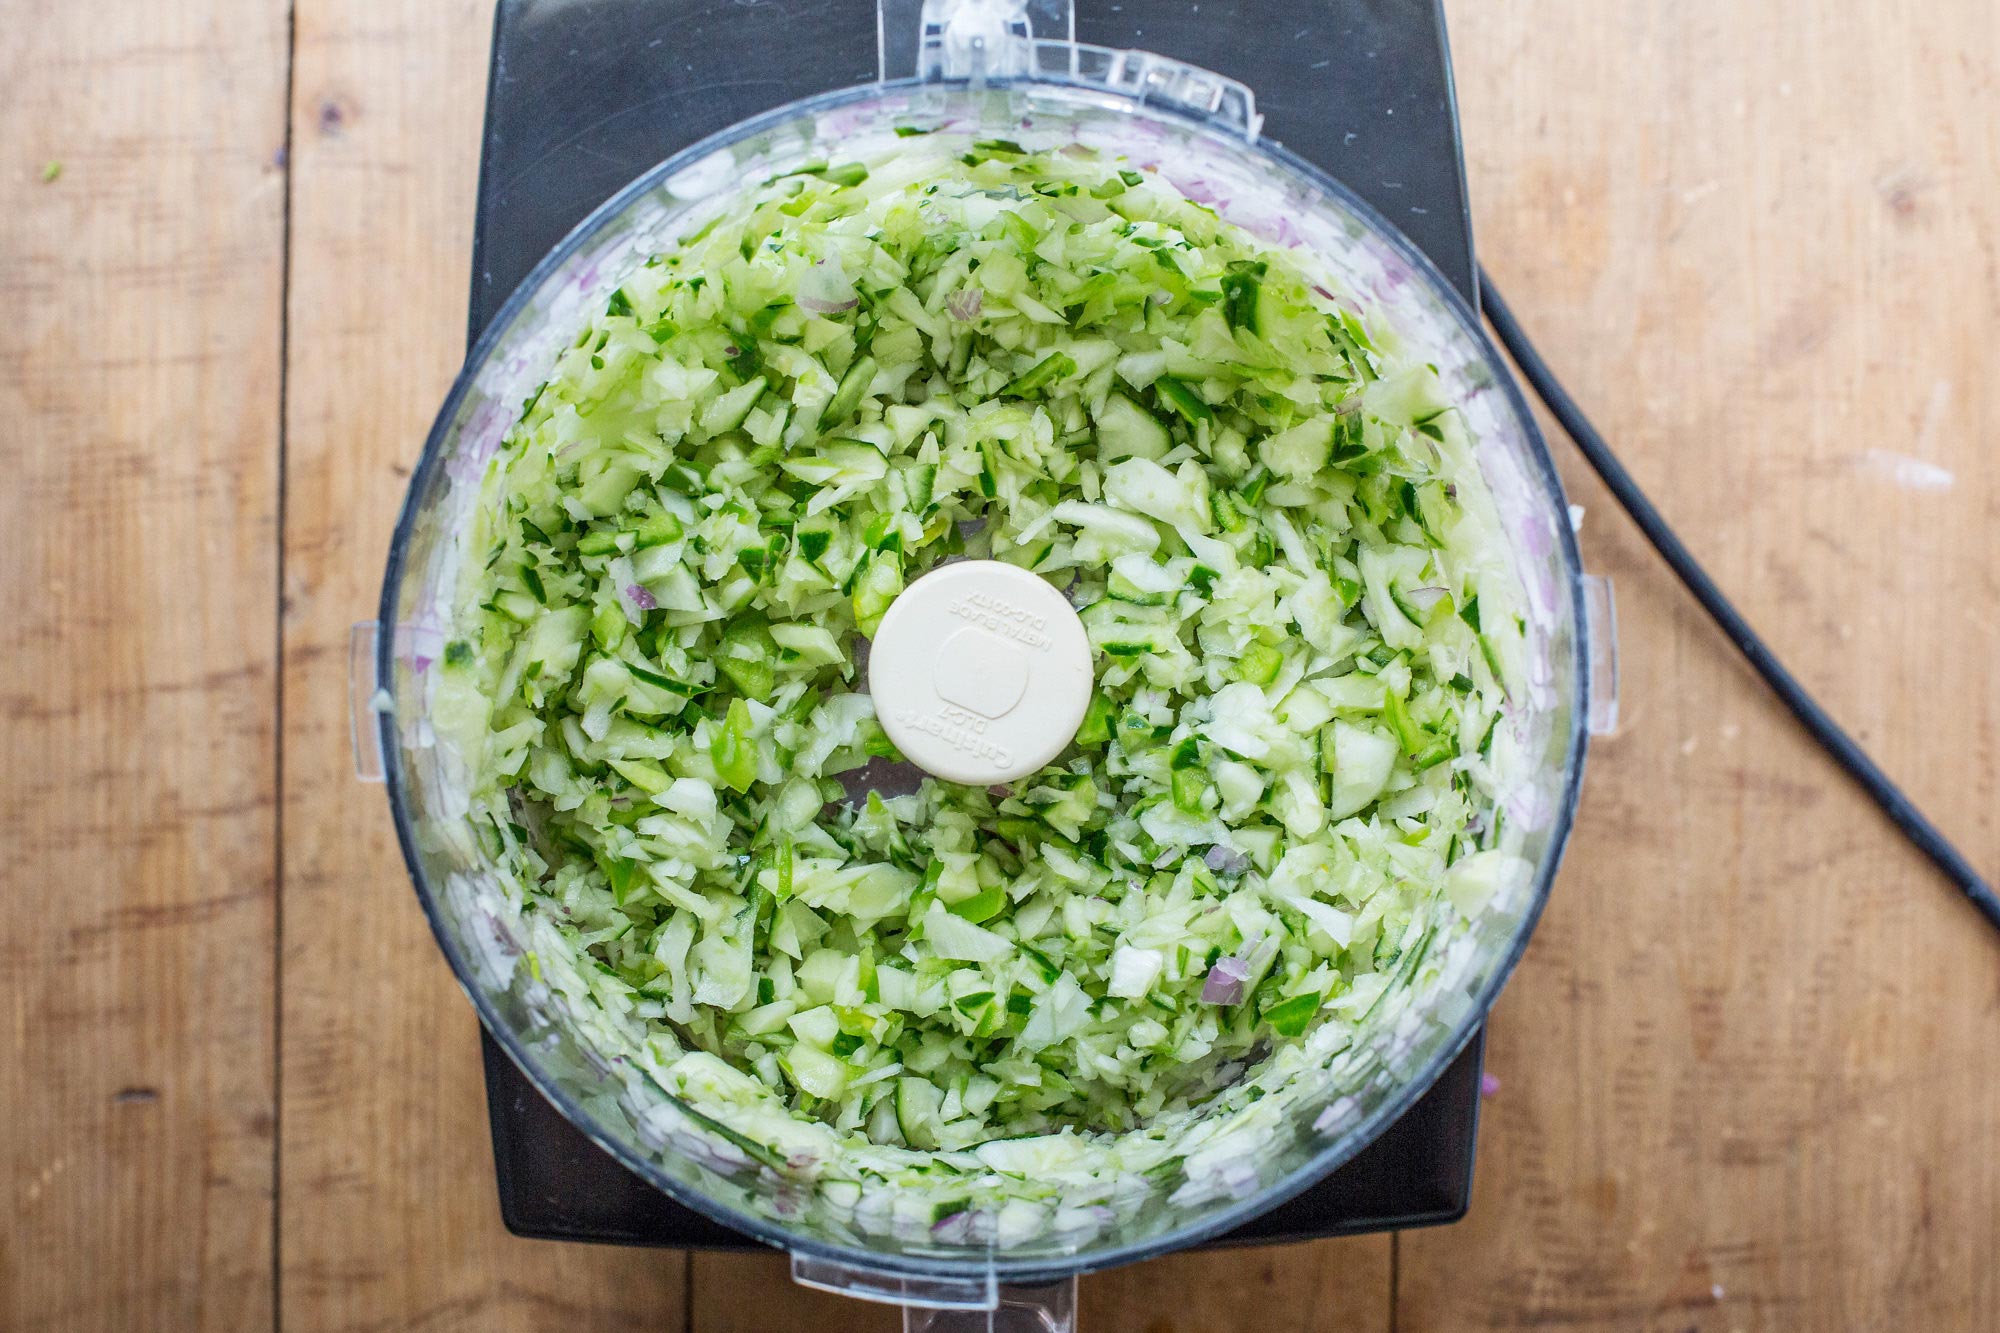 Chopped cucumber in the bowl of a food processor.